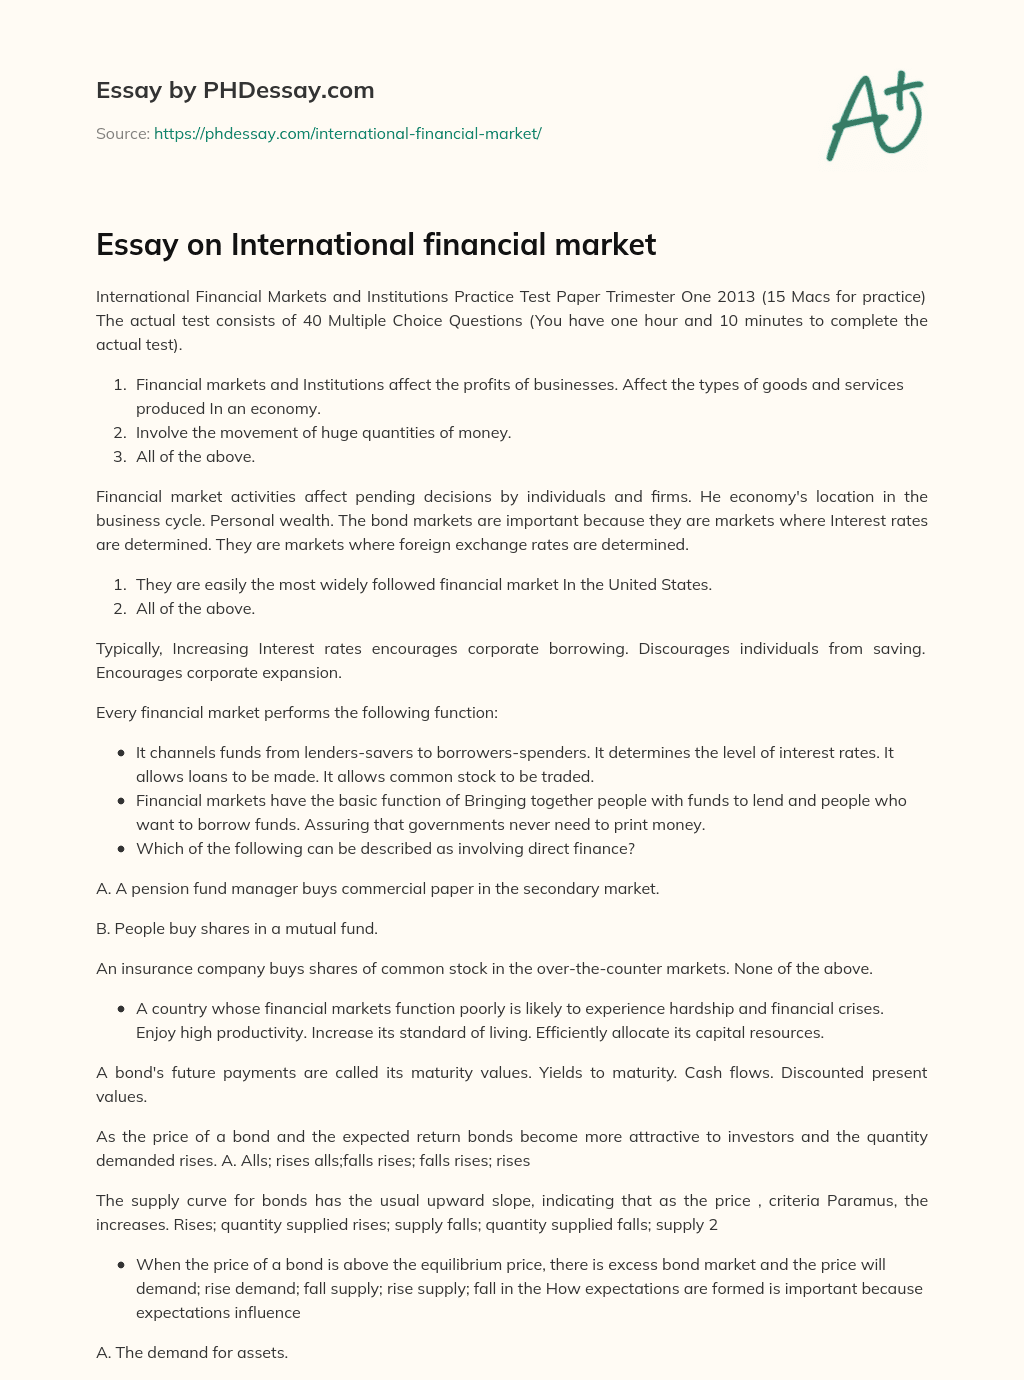 essay questions on financial markets